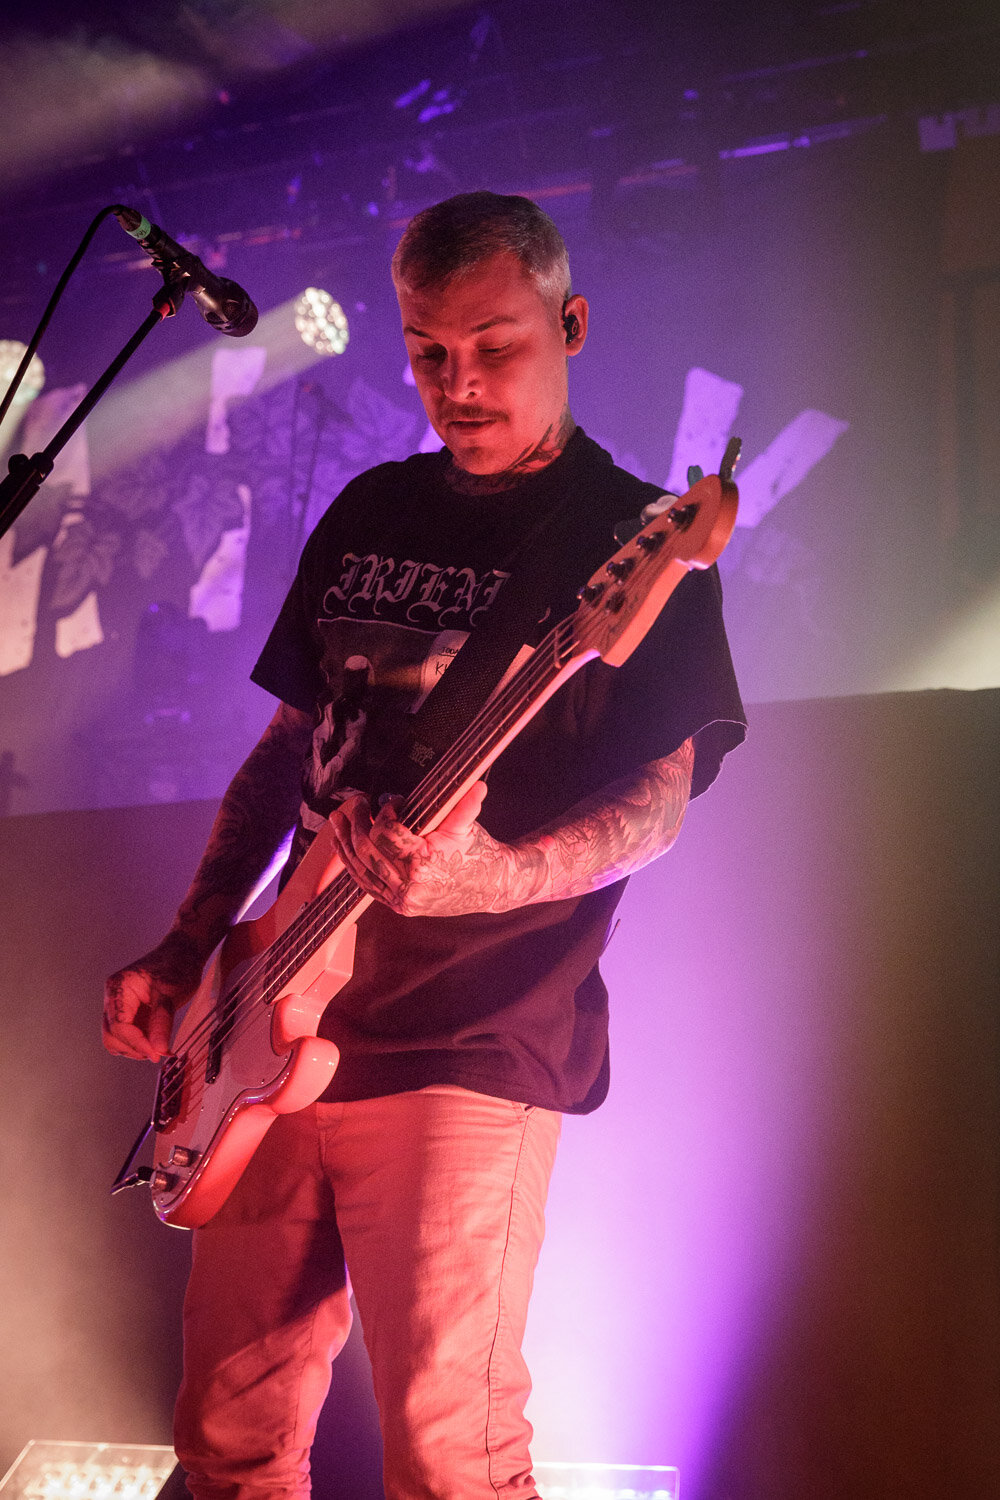 The Amity Affliction at the Manchester Academy on February 28th 2020